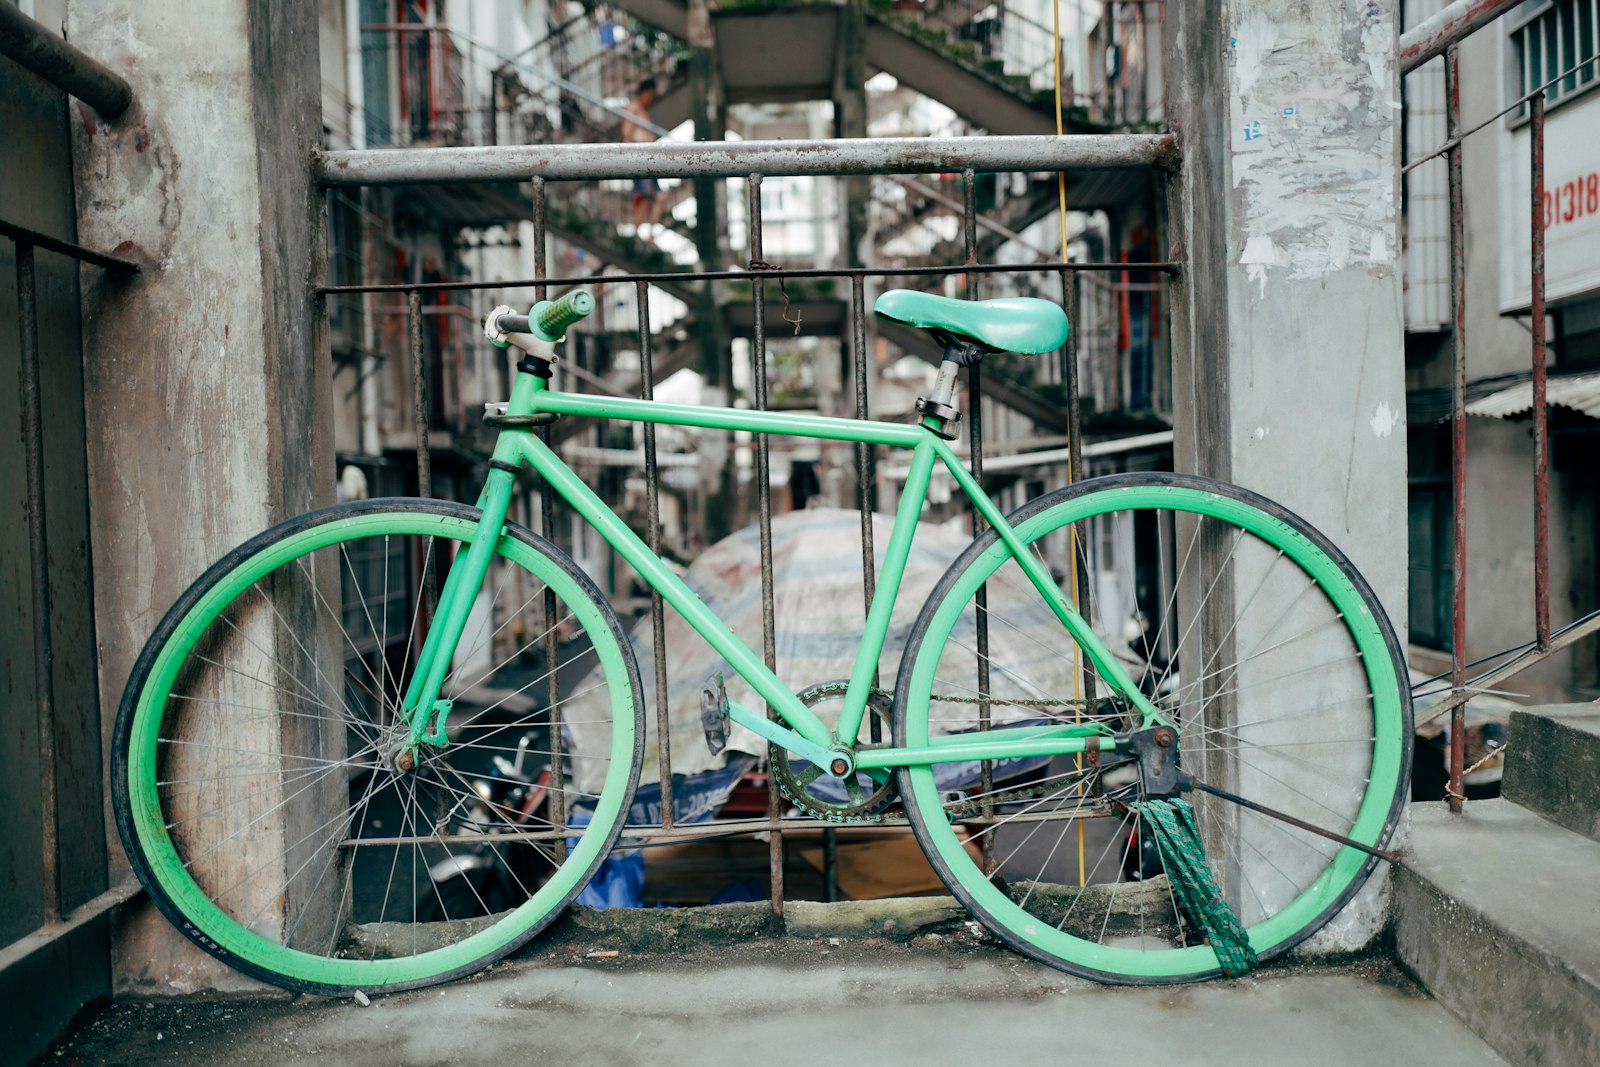 Leica Q (Typ 116) sample photo. Green city bike leaning photography